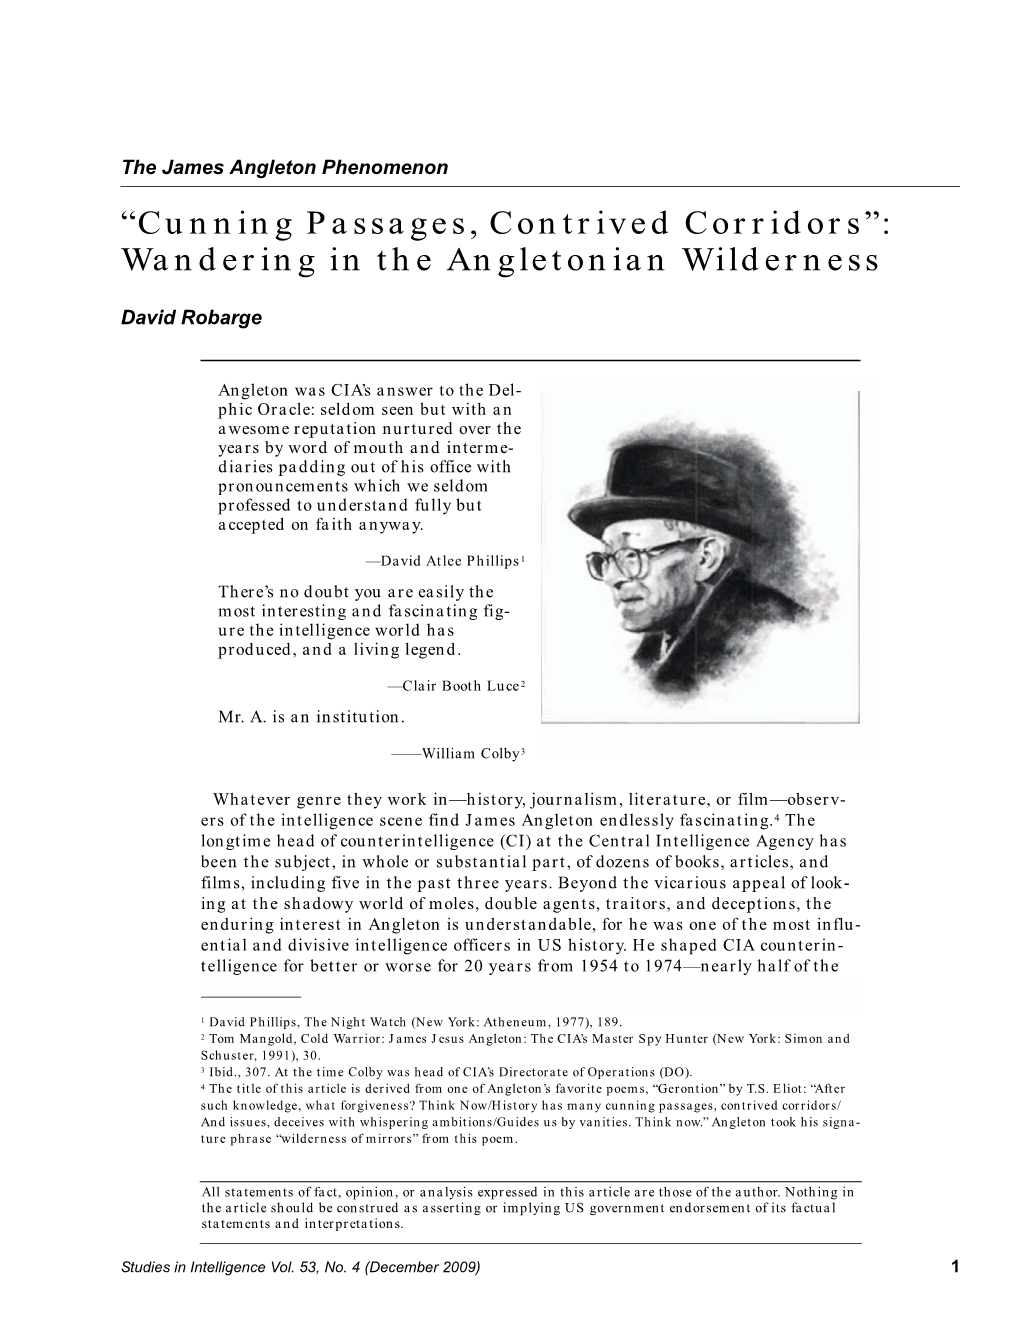 “Cunning Passages, Contrived Corridors”: Wandering in the Angletonian Wilderness